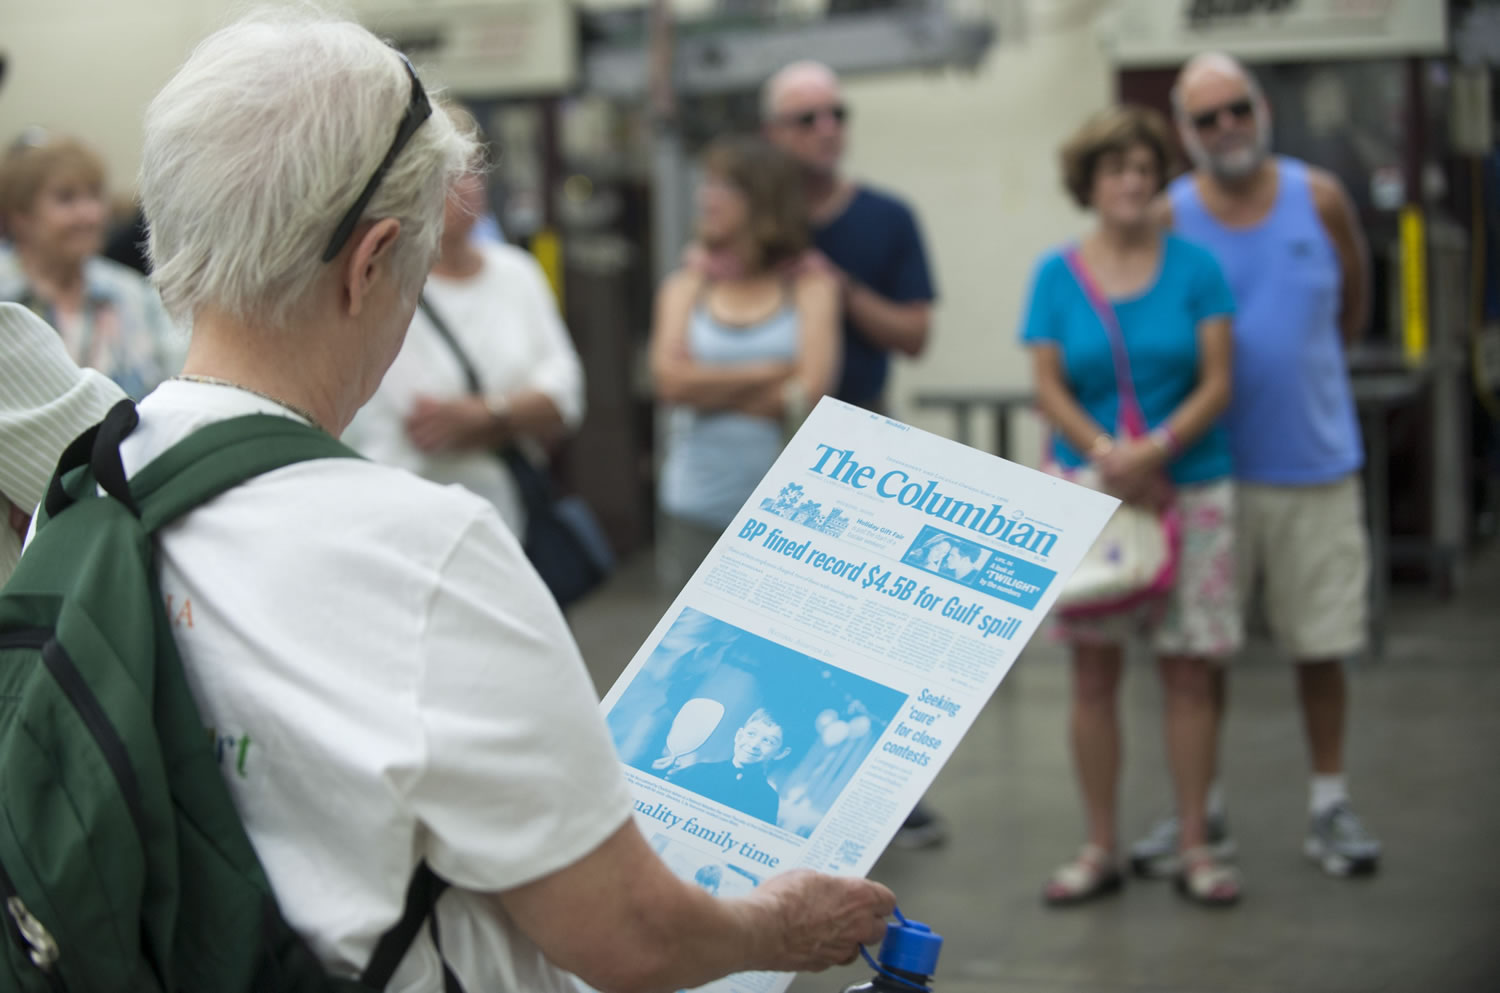 Visitors look at templates as they participate in a tour to see how the Columbian newspaper is printed in Vancouver Saturday. The event was held in advance of the Columbian newspaper's 125th anniversary, coming up in October.